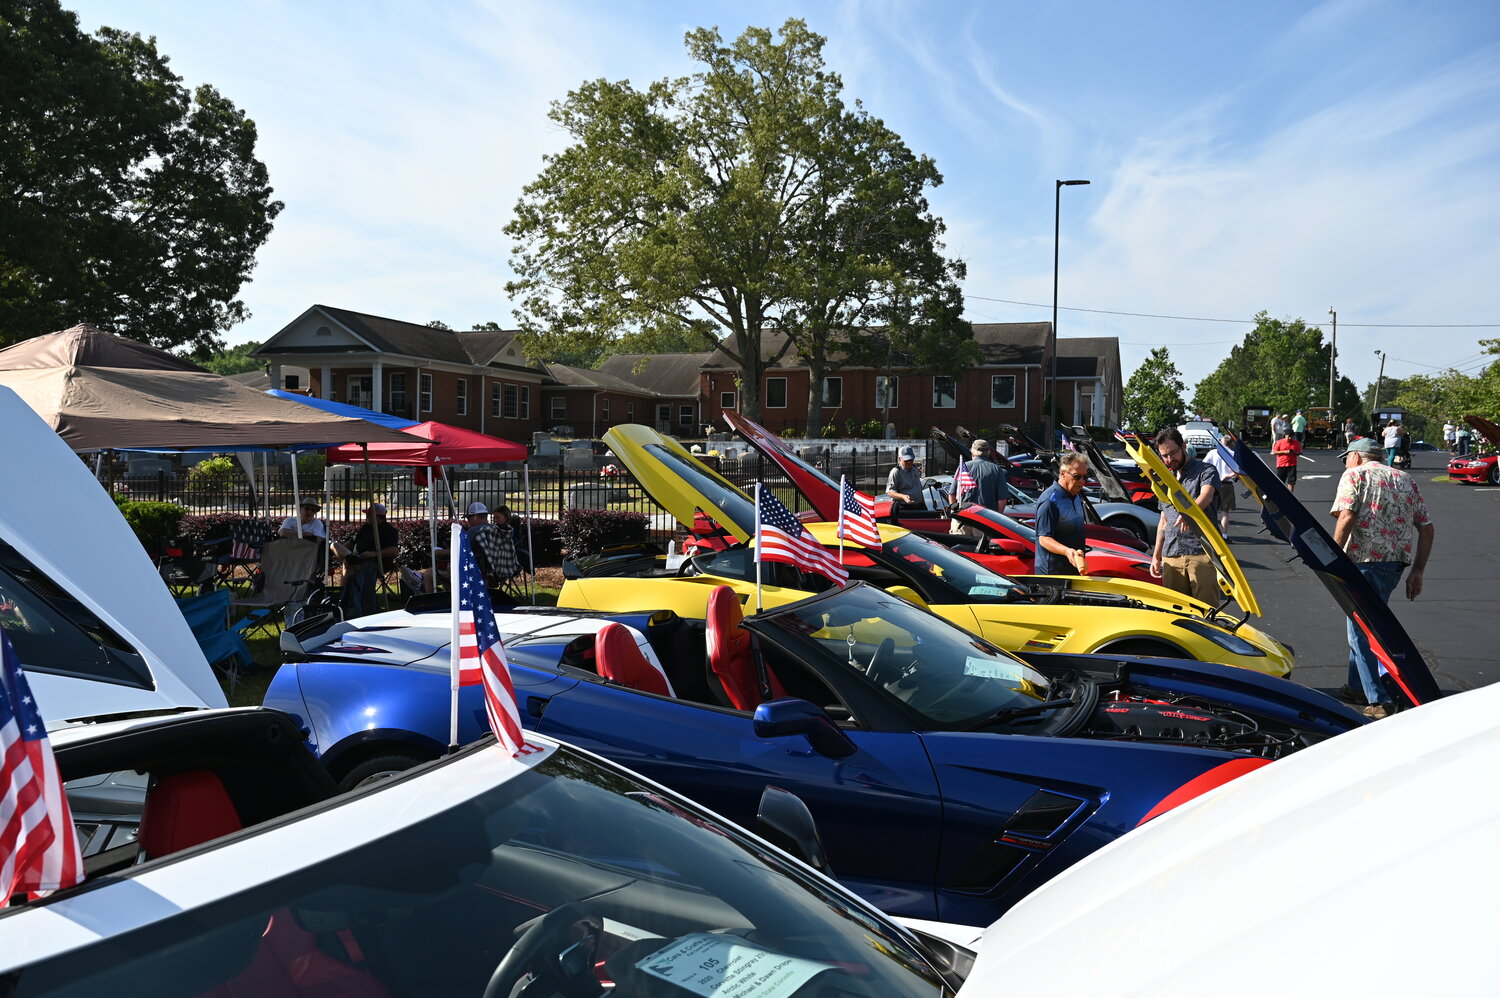 Corvettes are among the more than 100 cars on display at Flat Creek Baptist Church in Fayetteville, Ga. on Saturday, June 3, 2023. (Index/Roger Alford)